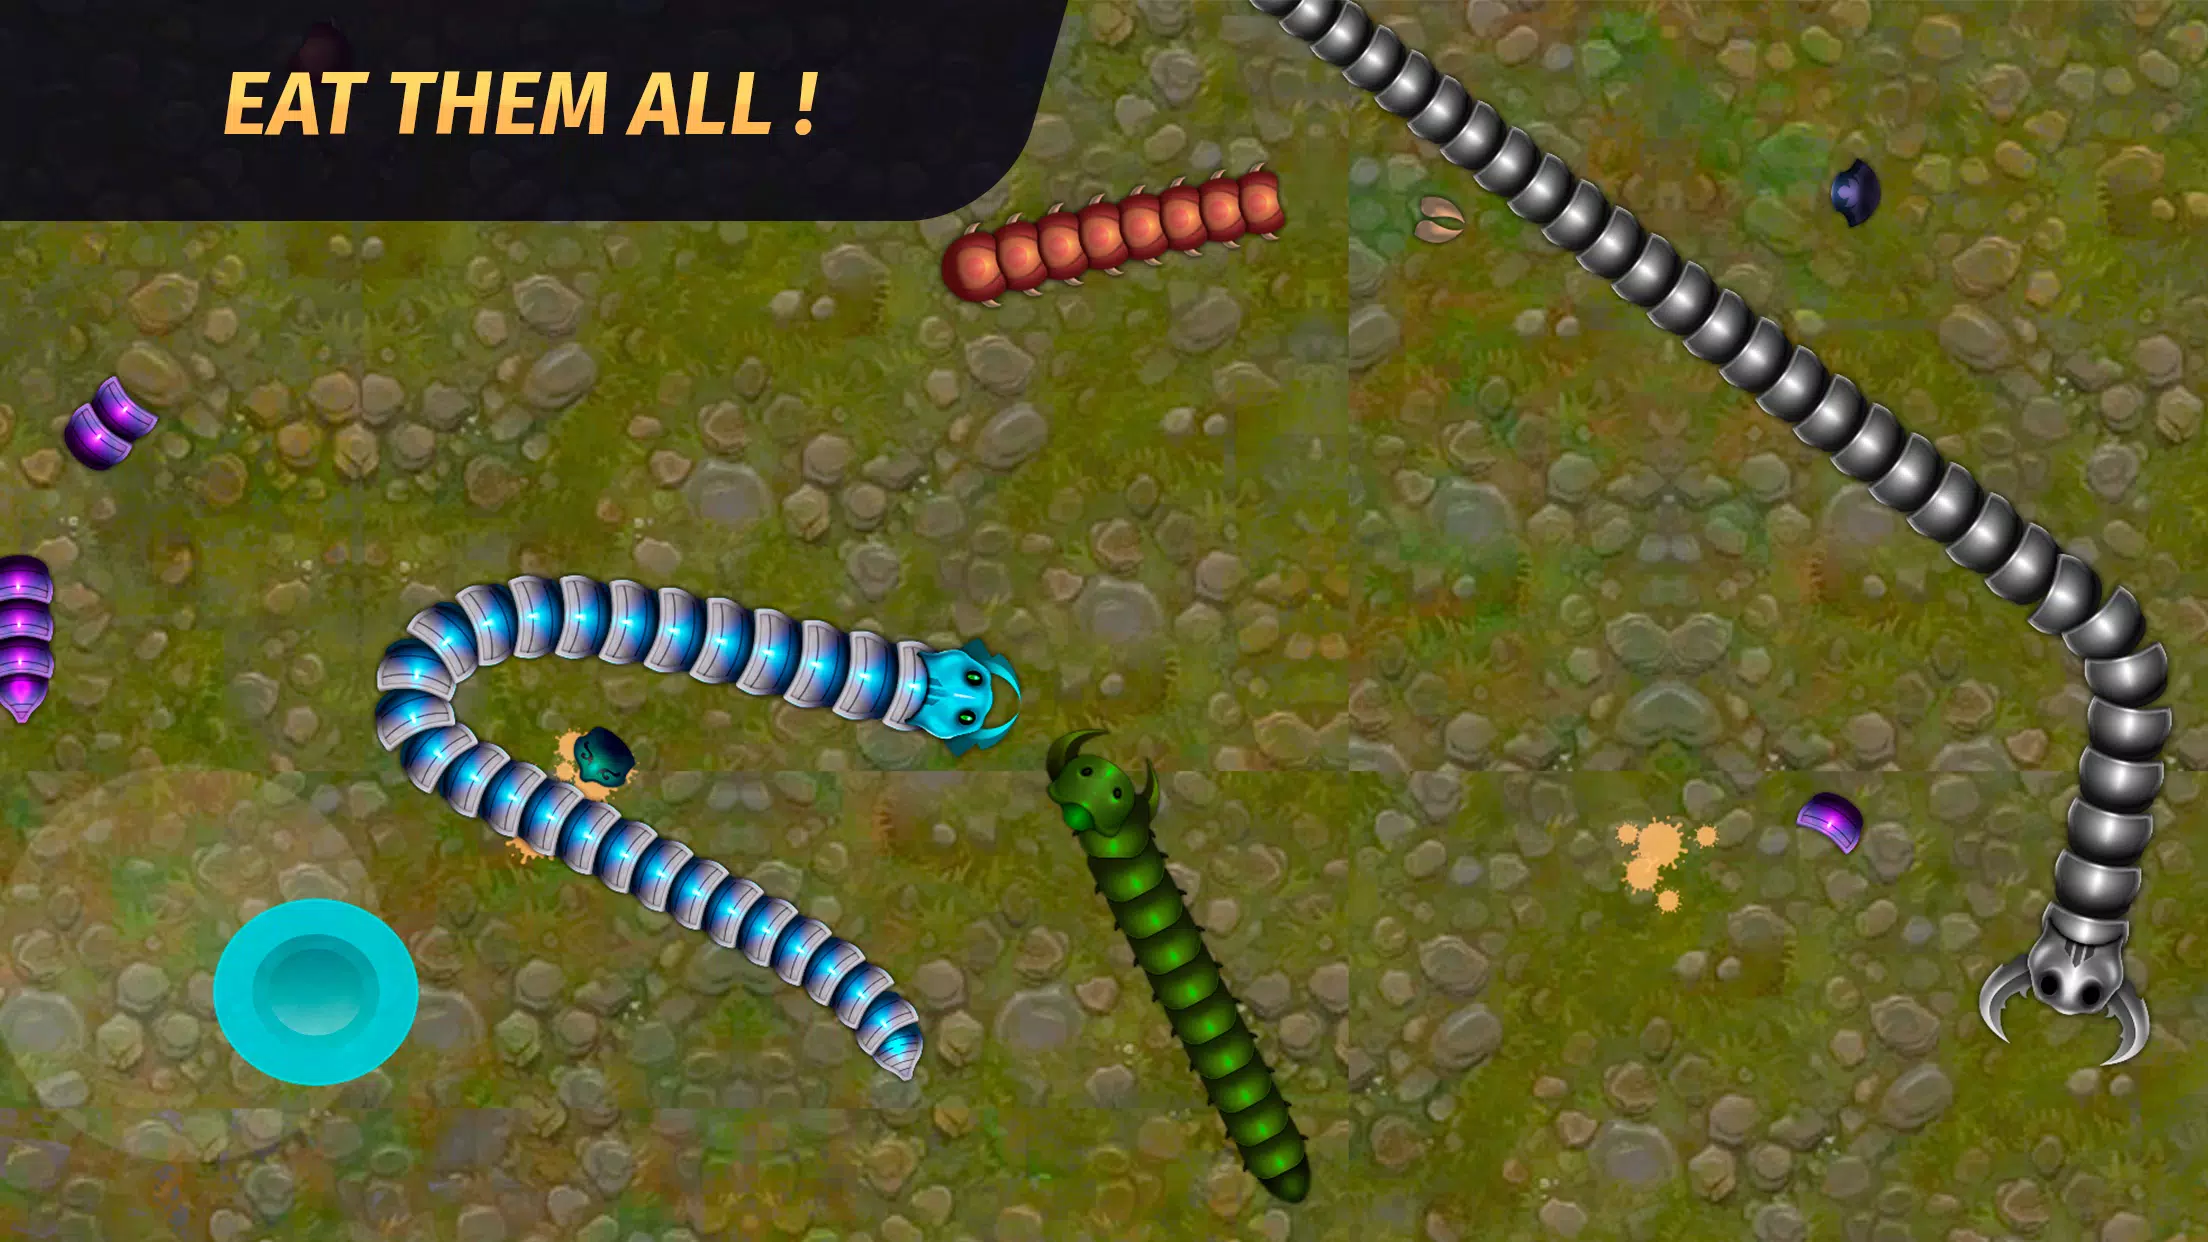 Gusanos.io - Snake Game Online - Apps on Google Play